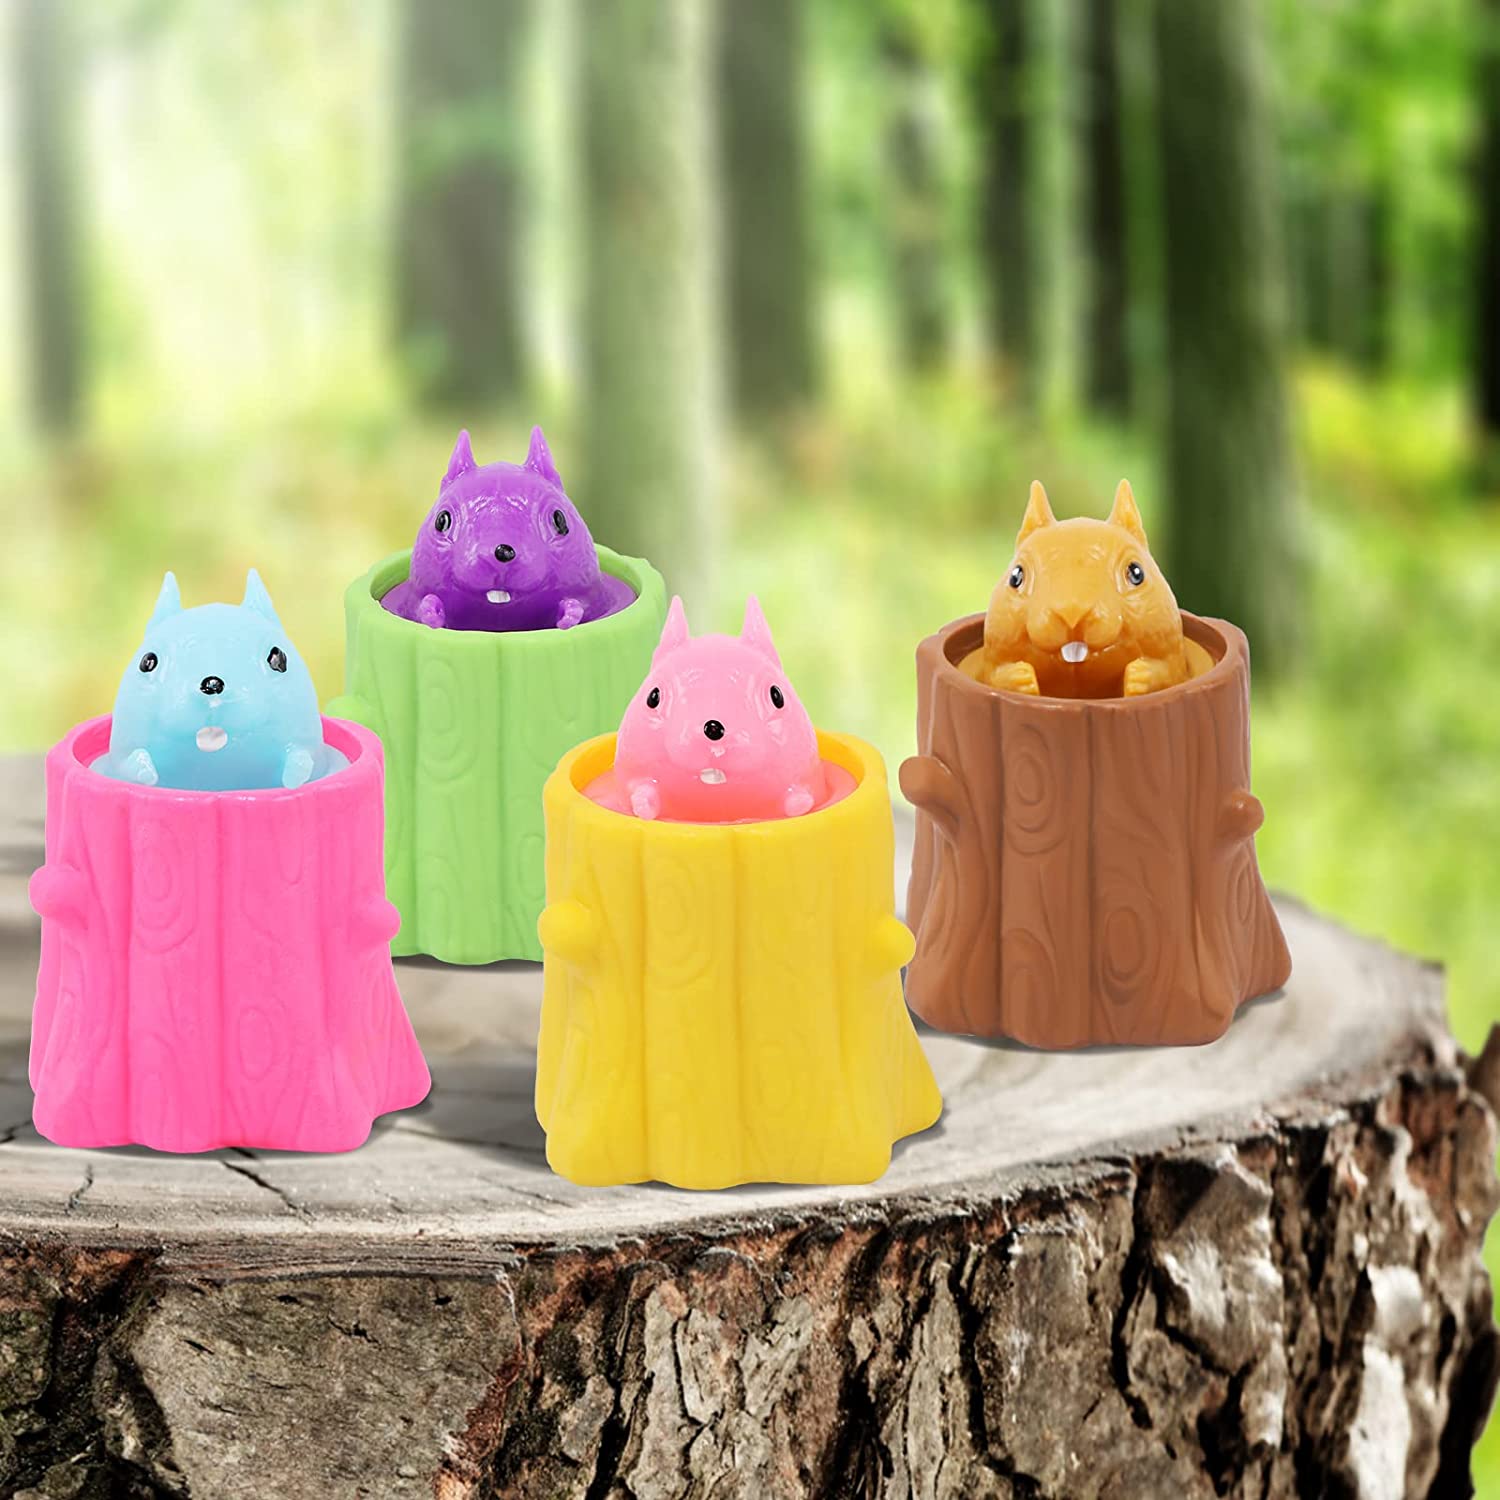 Funny Squirrel Squeeze Toy - Buy 5 Get Extra 20% OFF